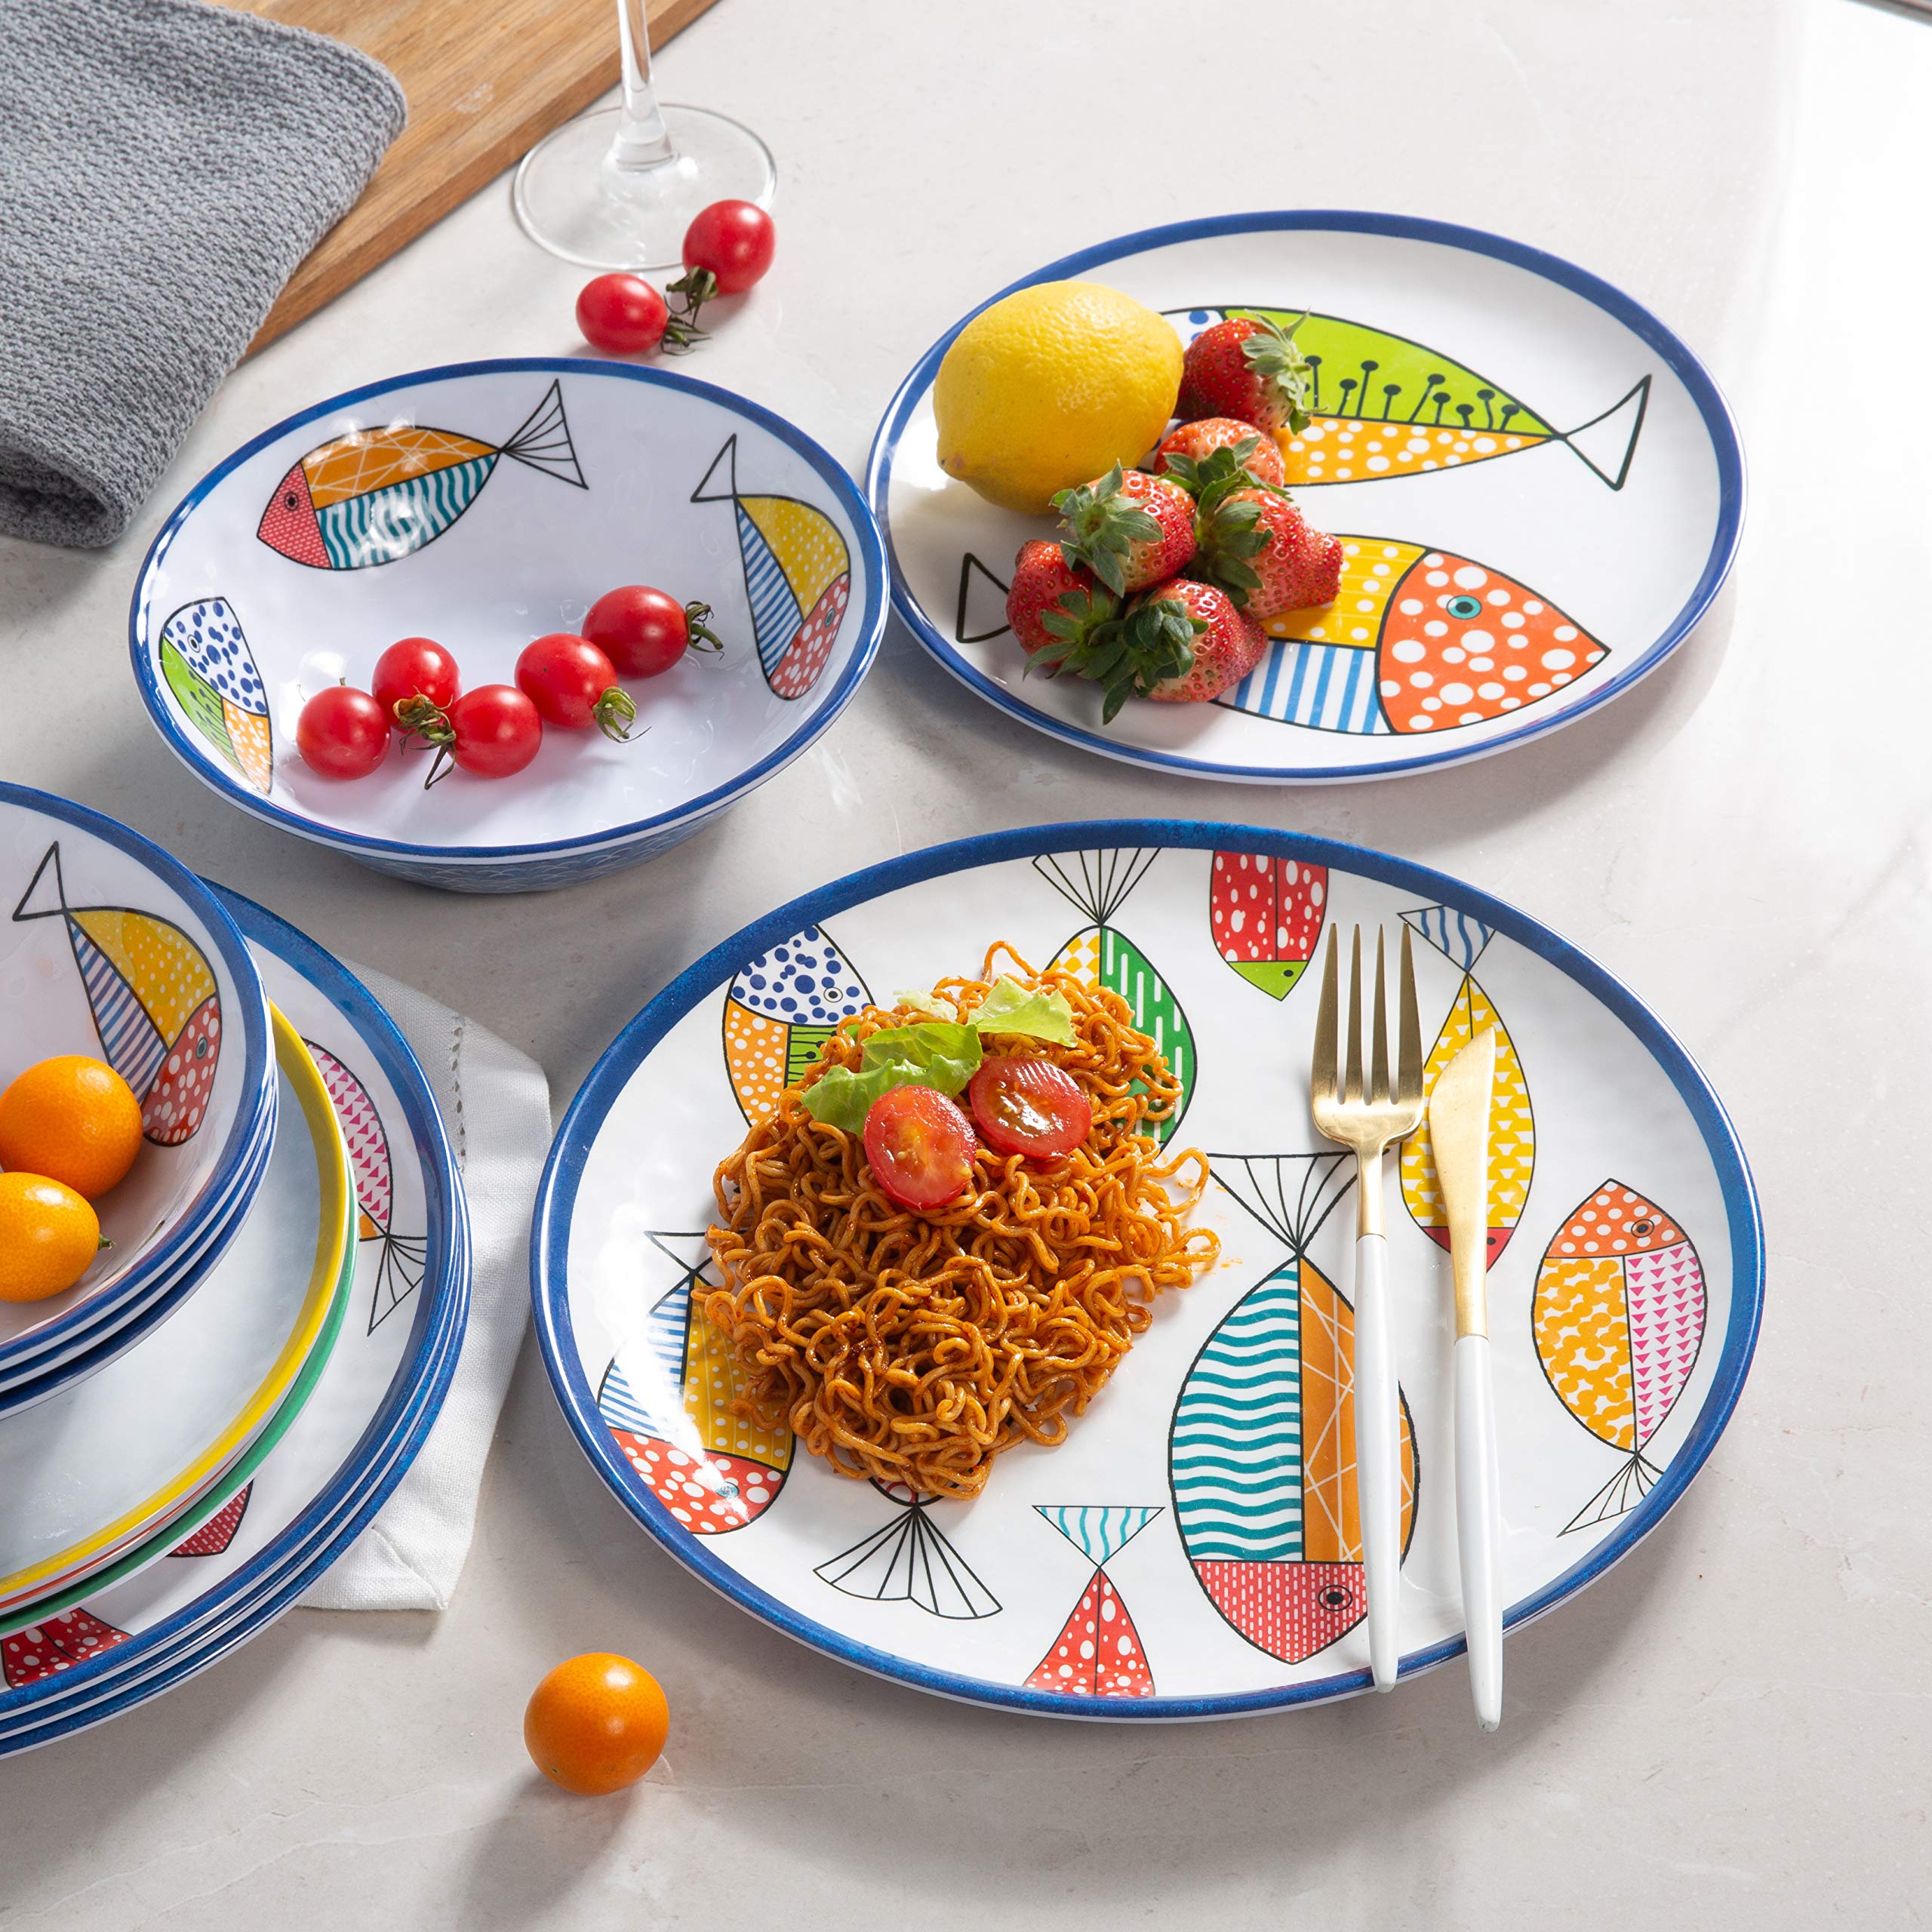 Gofunfun Melamine Dinnerware set for 4, Plates and Bowls Sets, Great for Camper, RV, Indoors Outdoors Use with Ocean Printed, Unbreakable